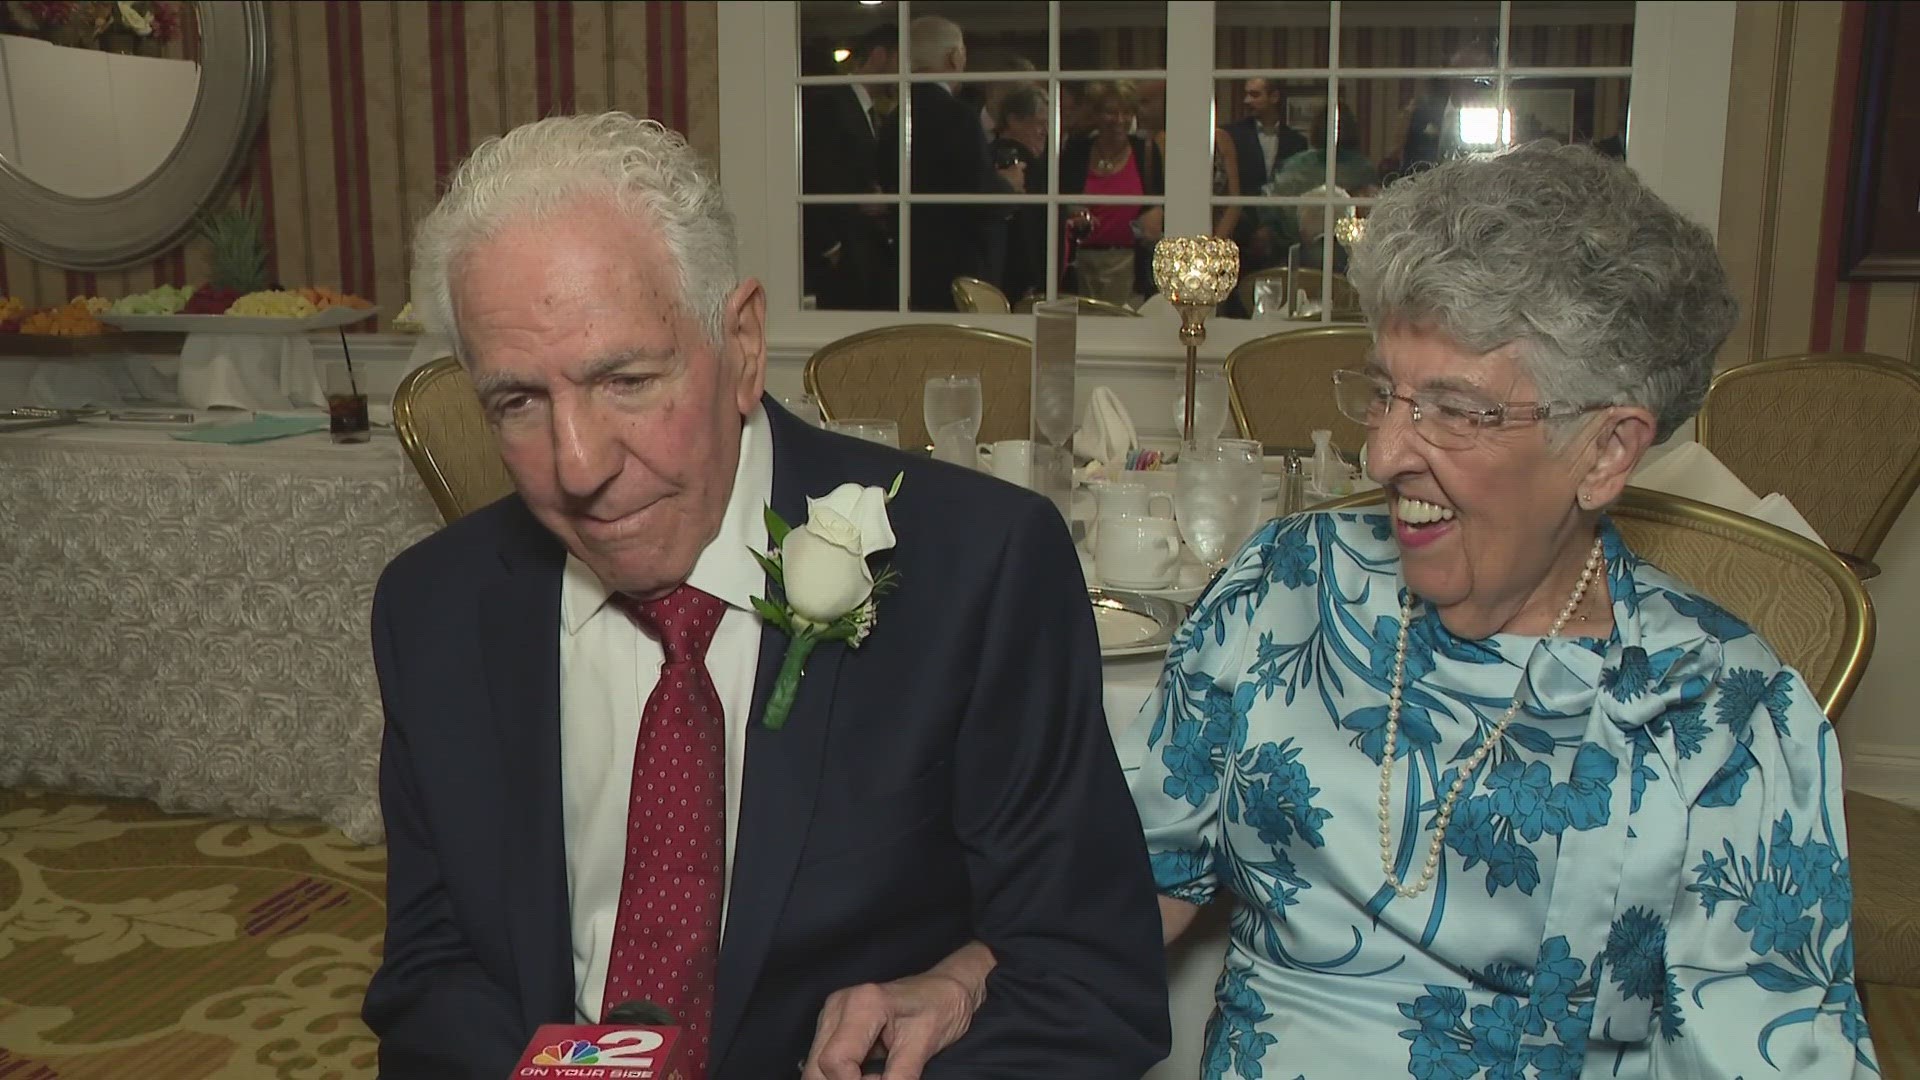 The two 89 year-olds tied the knot yesterday surrounded by their friends and family.